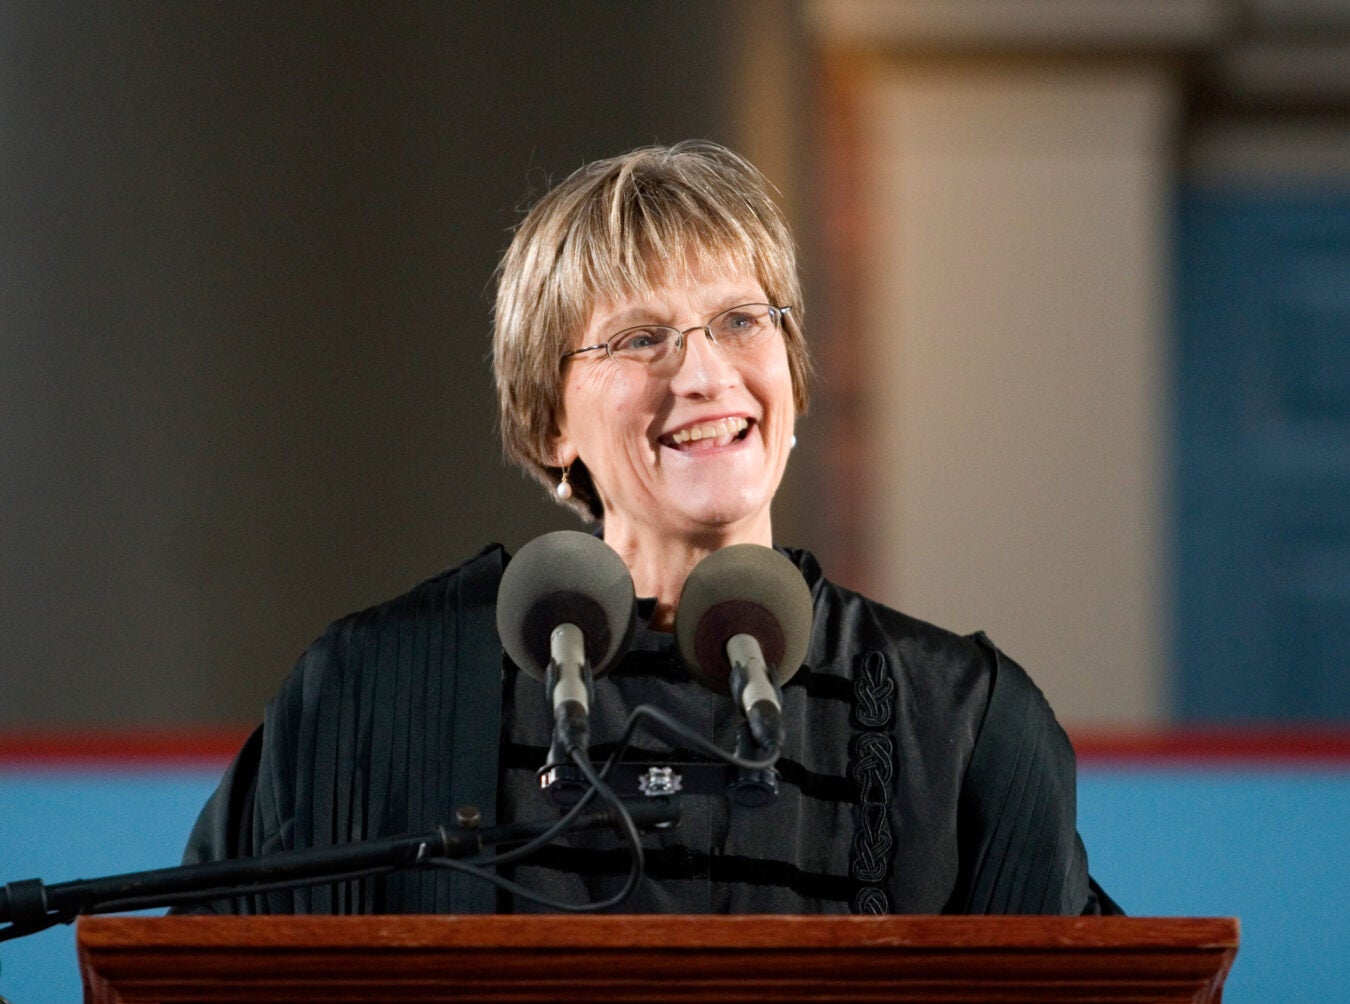 Drew Faust at podium during installation as Harvard president.